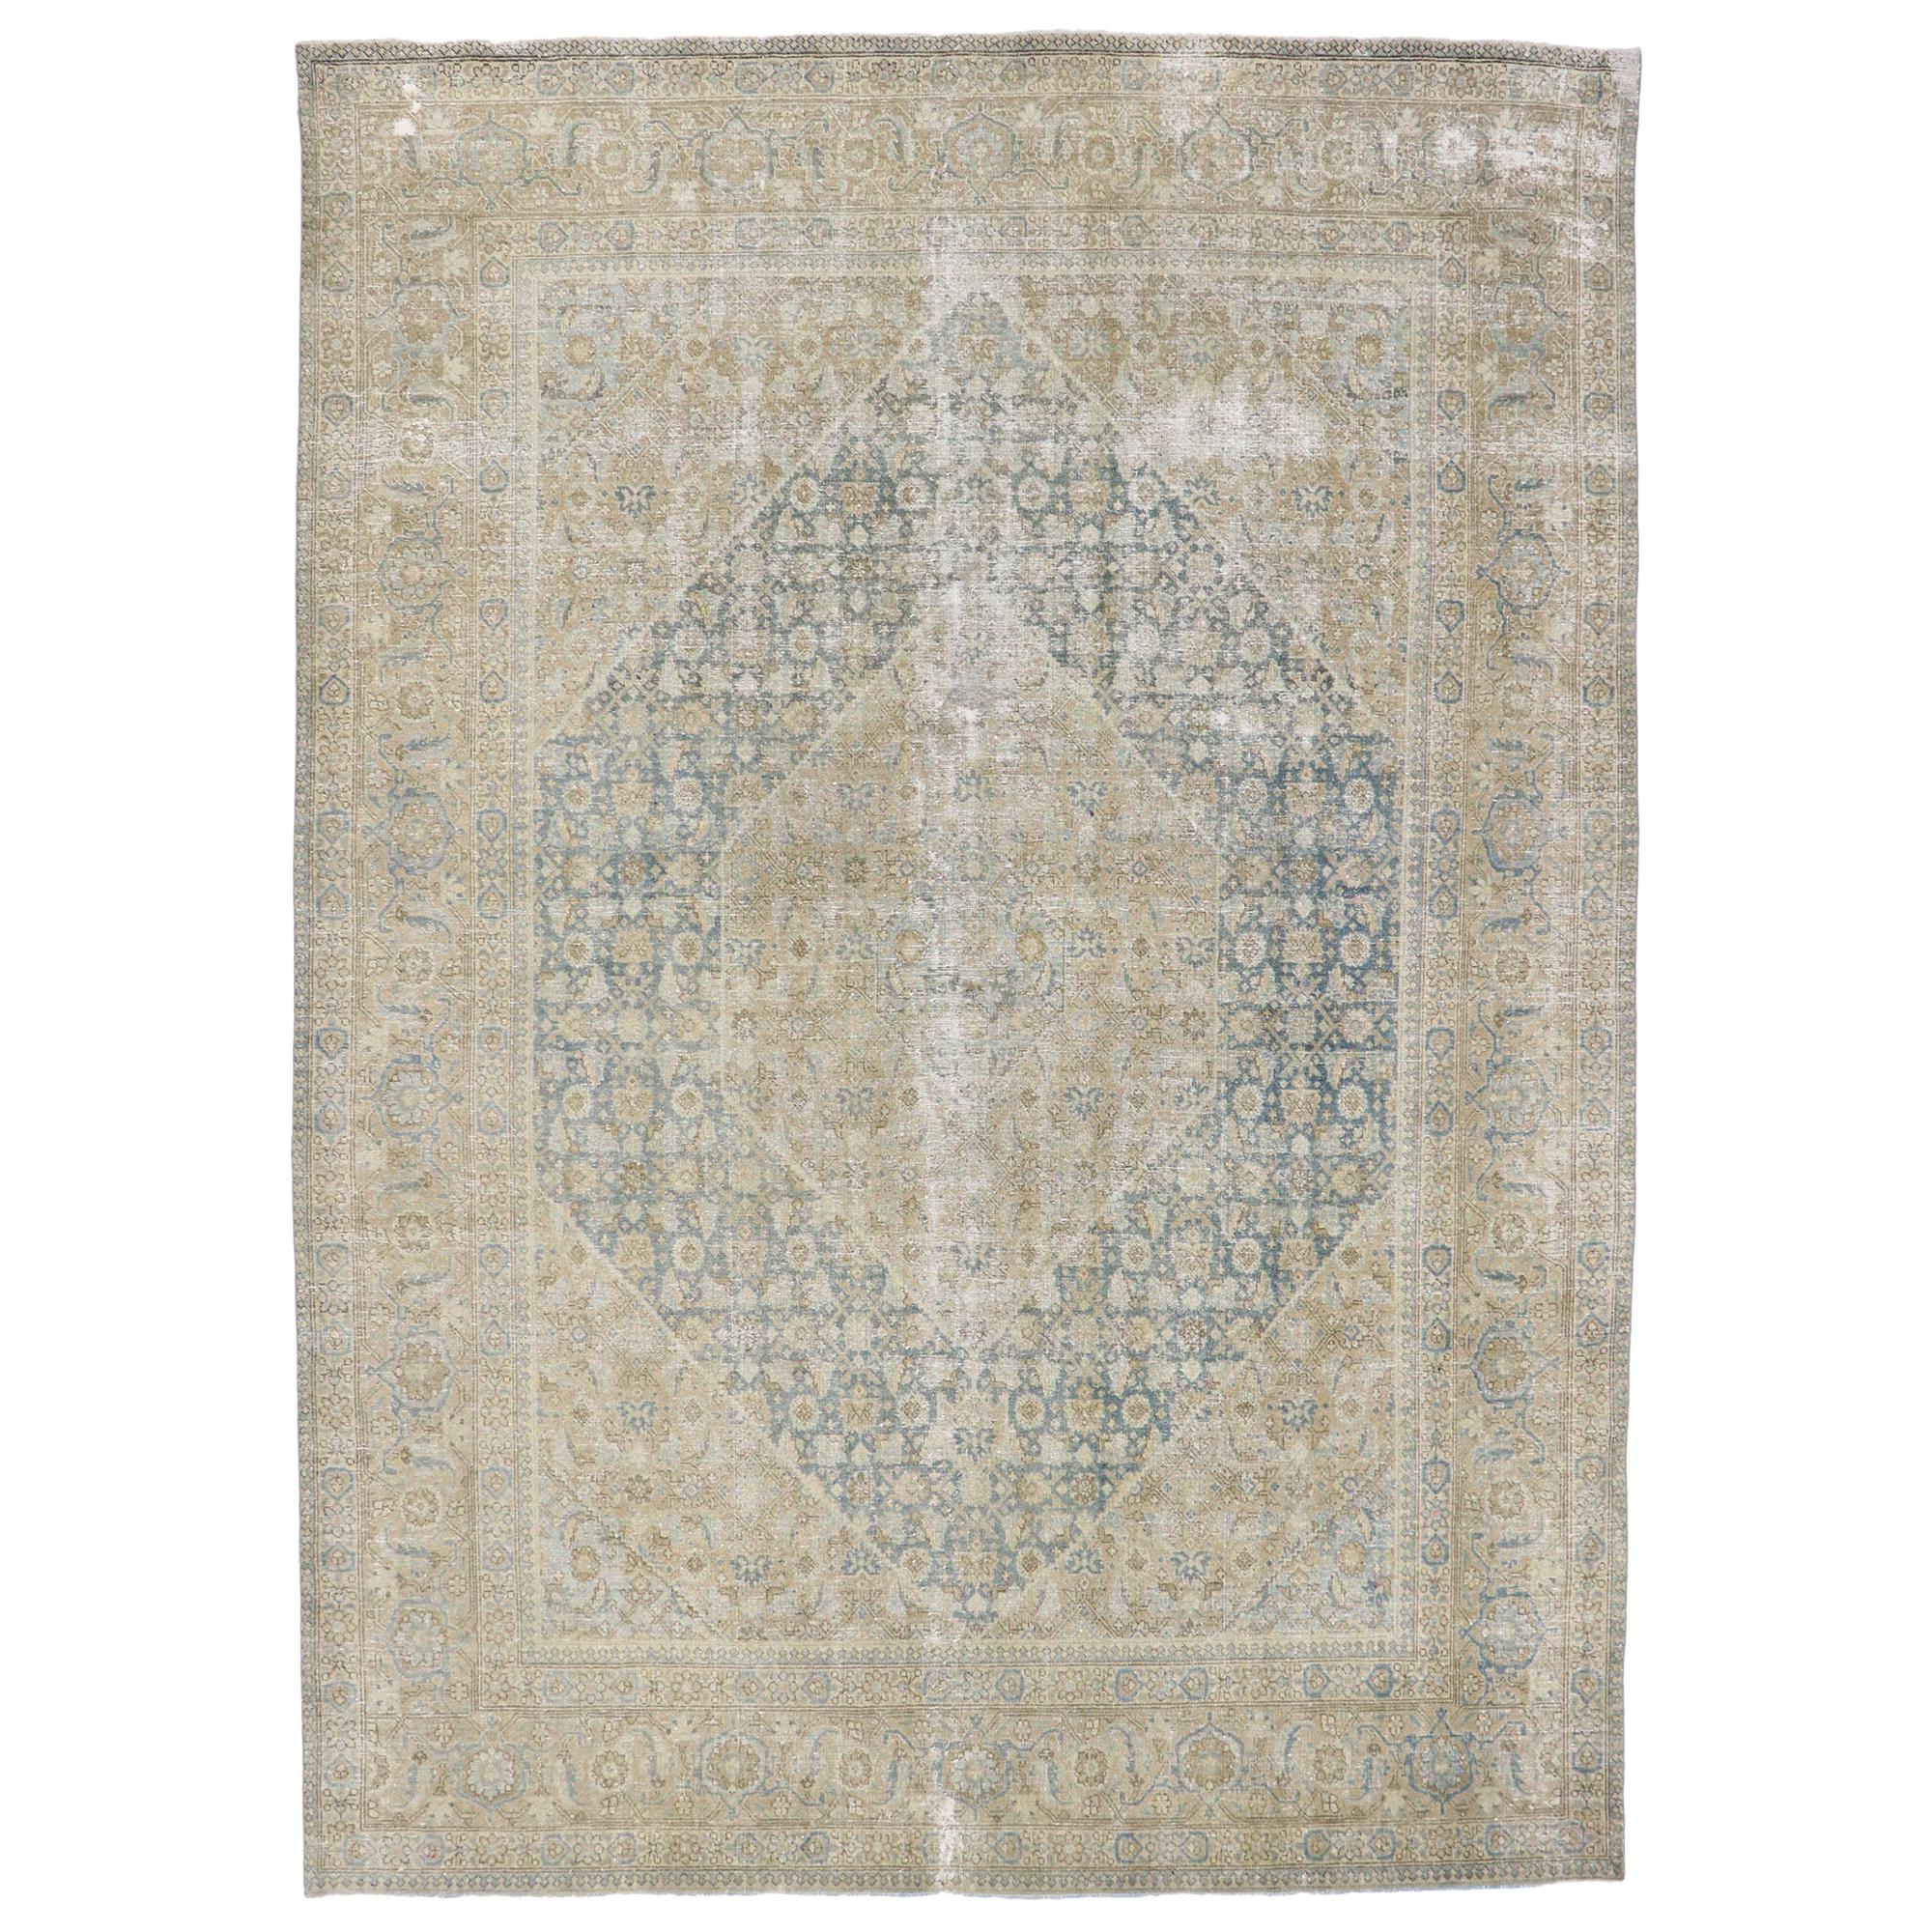 Distressed Antique Persian Mahi Tabriz Rug with Modern Rustic Style